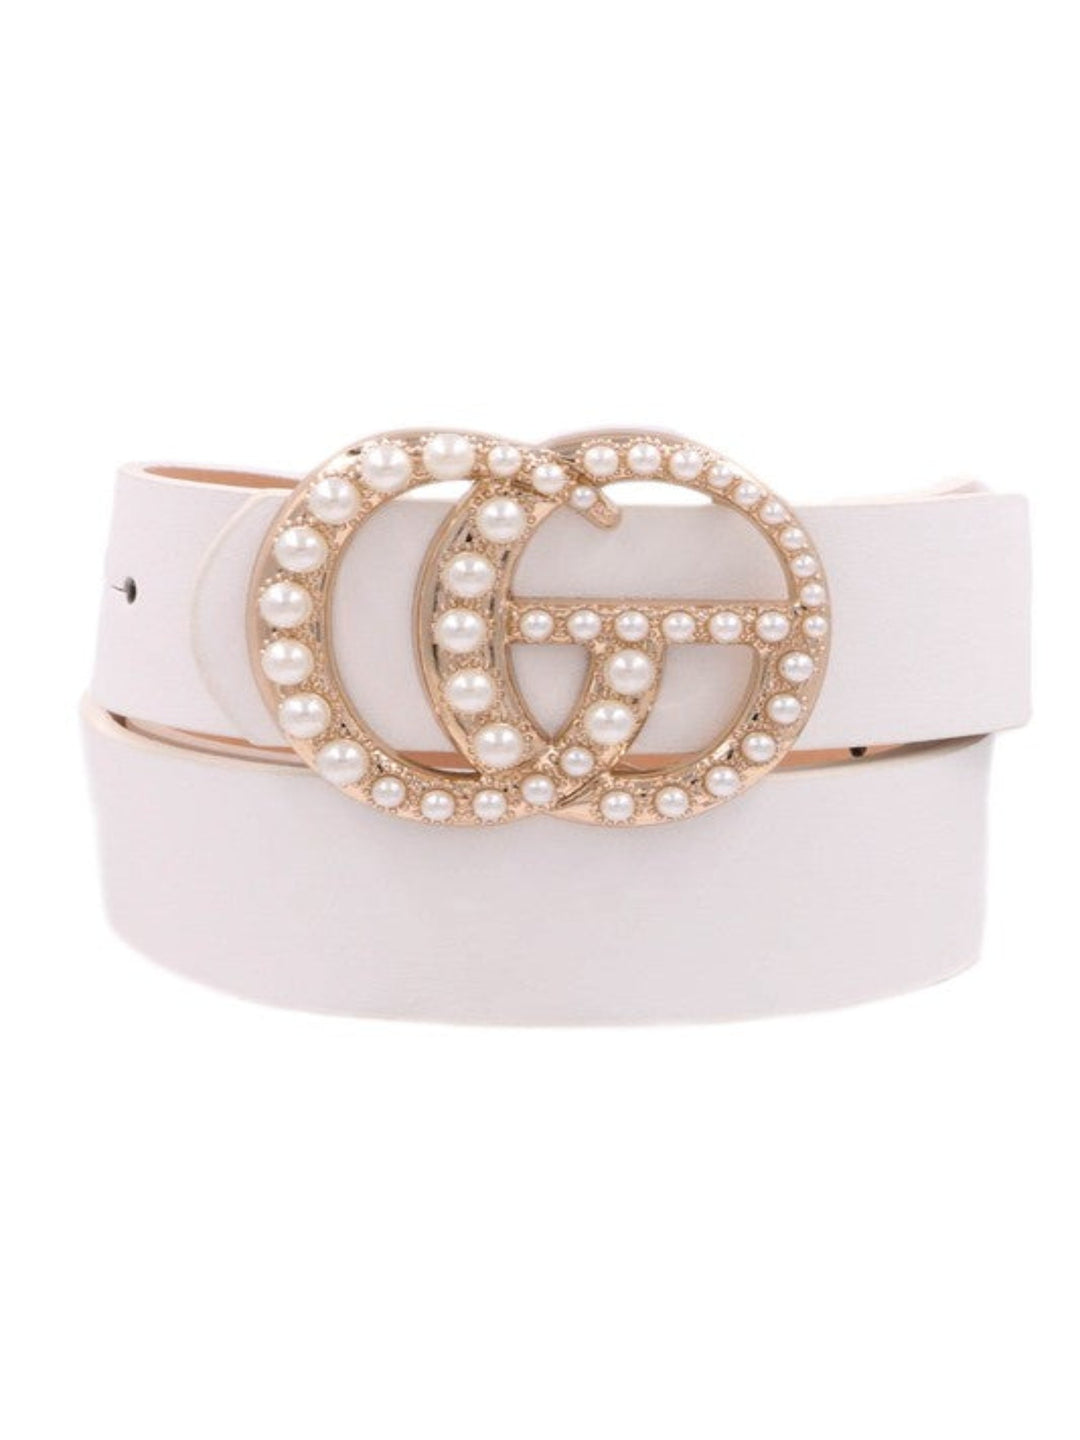 CG Faux Leather Belt, White w/Pearl Accent Gold Buckle